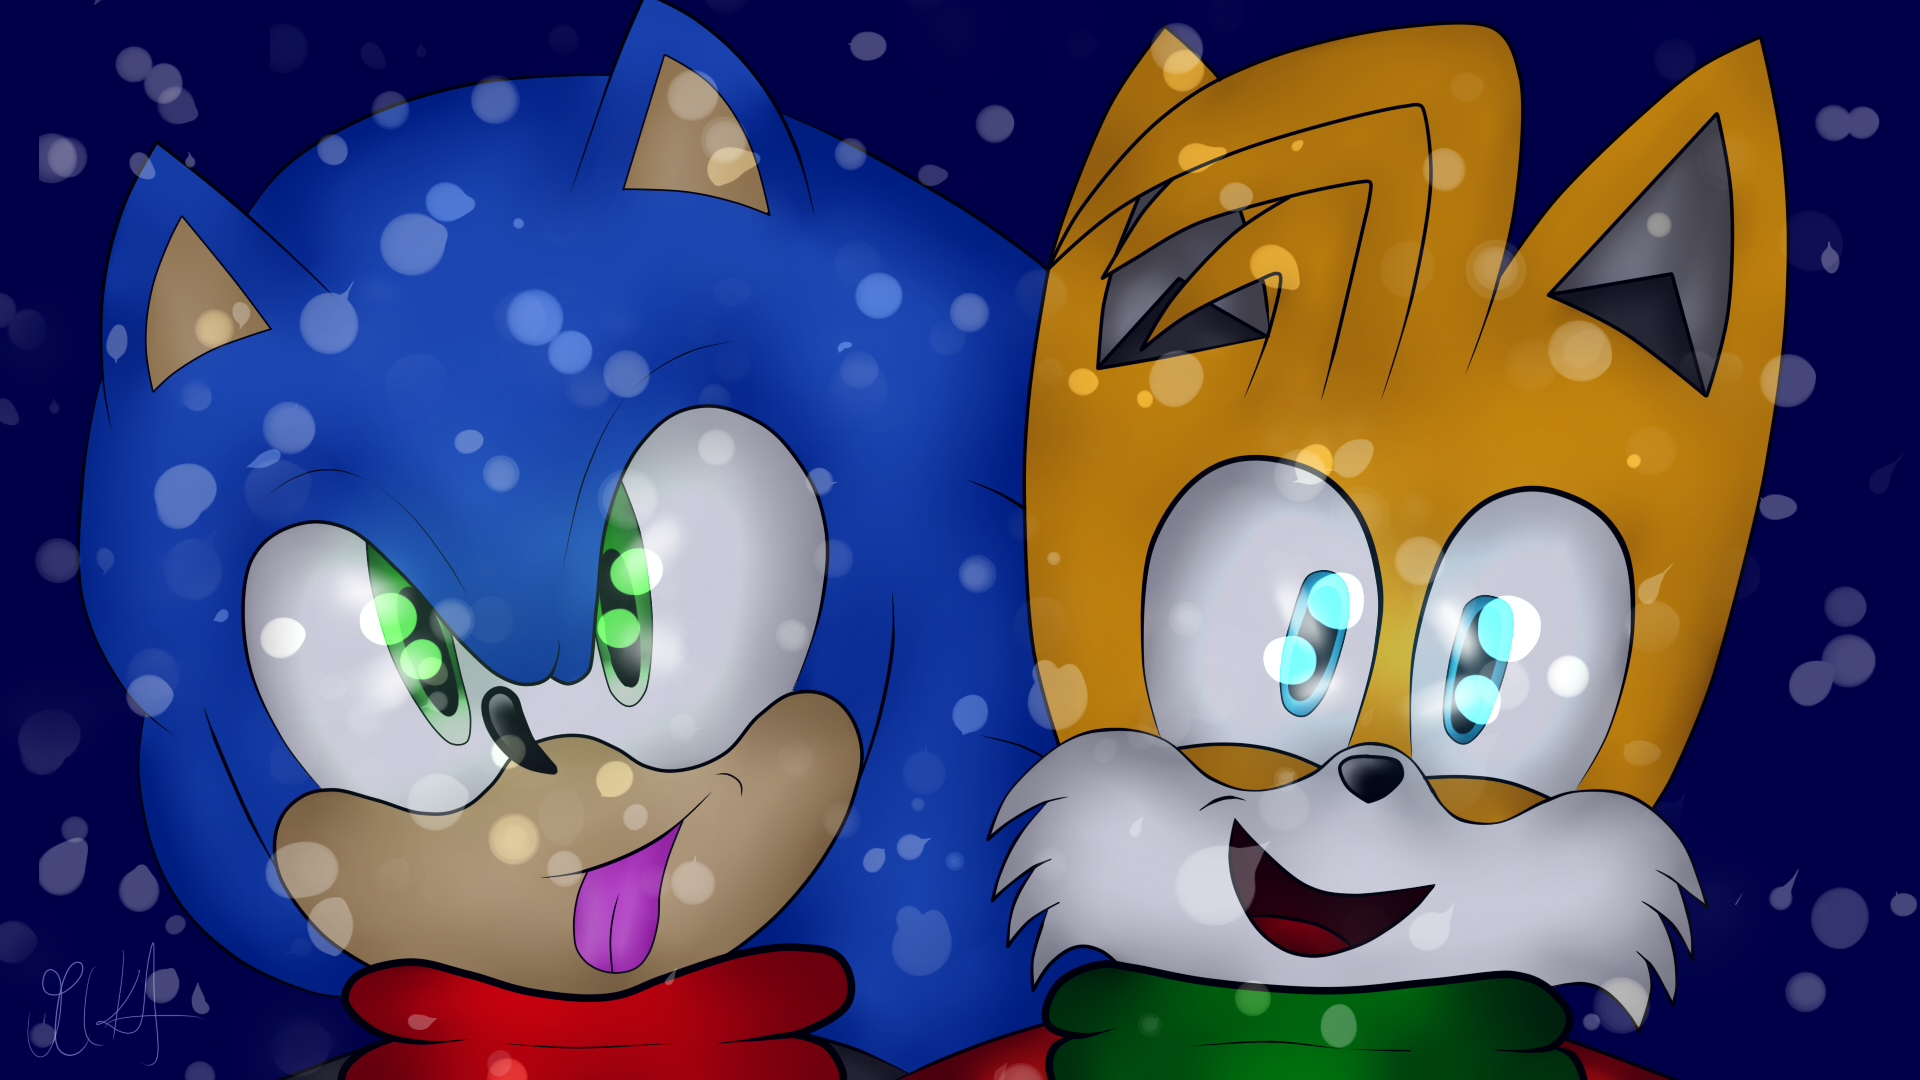 Sonic And Tails In Animatronic World by TazzArtTime on DeviantArt